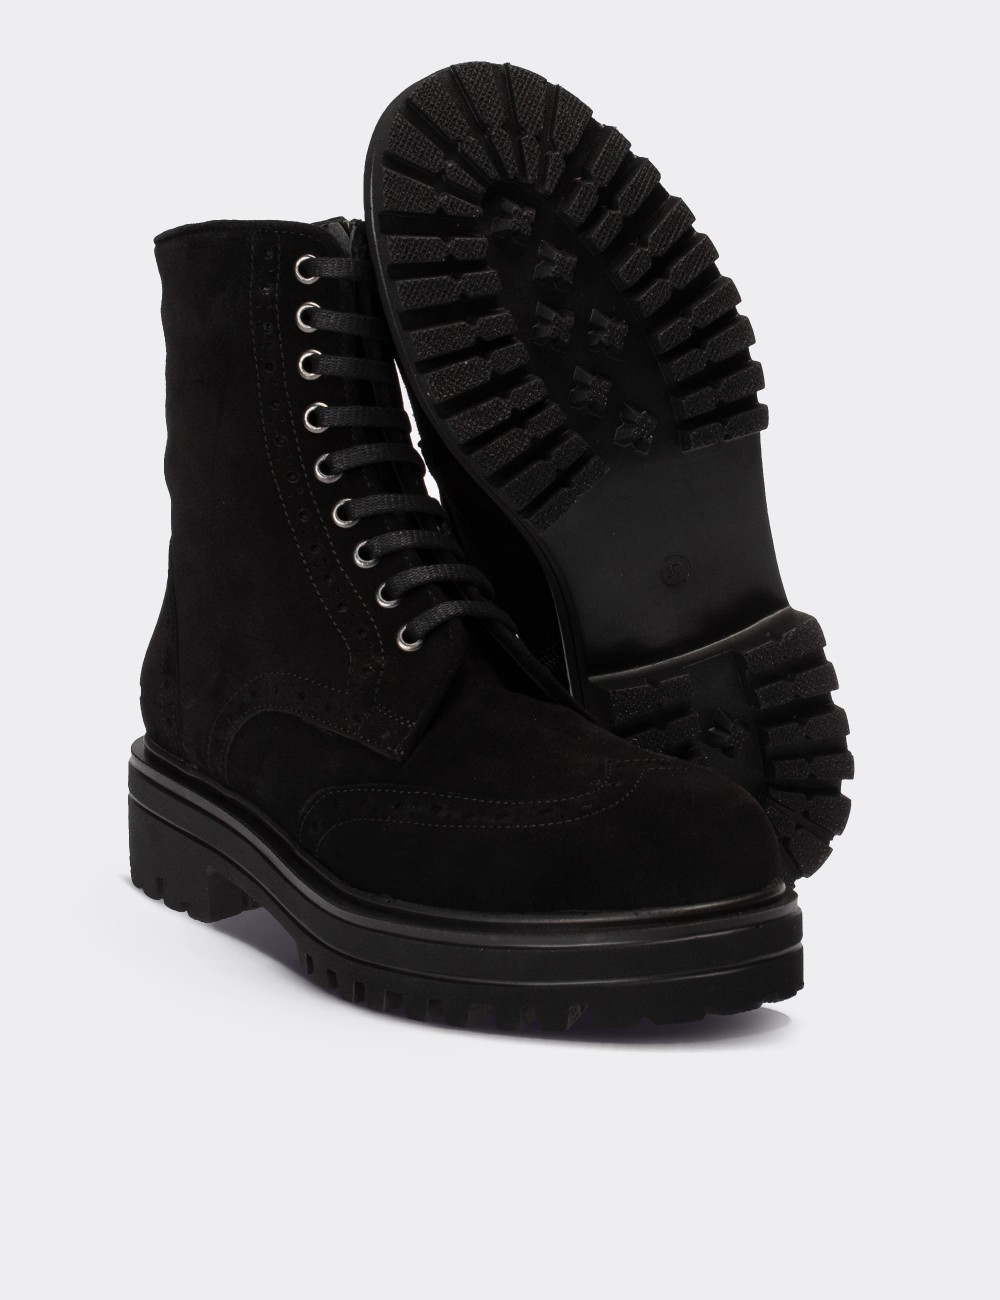 Black Suede Leather Boots - 01804ZSYHE06